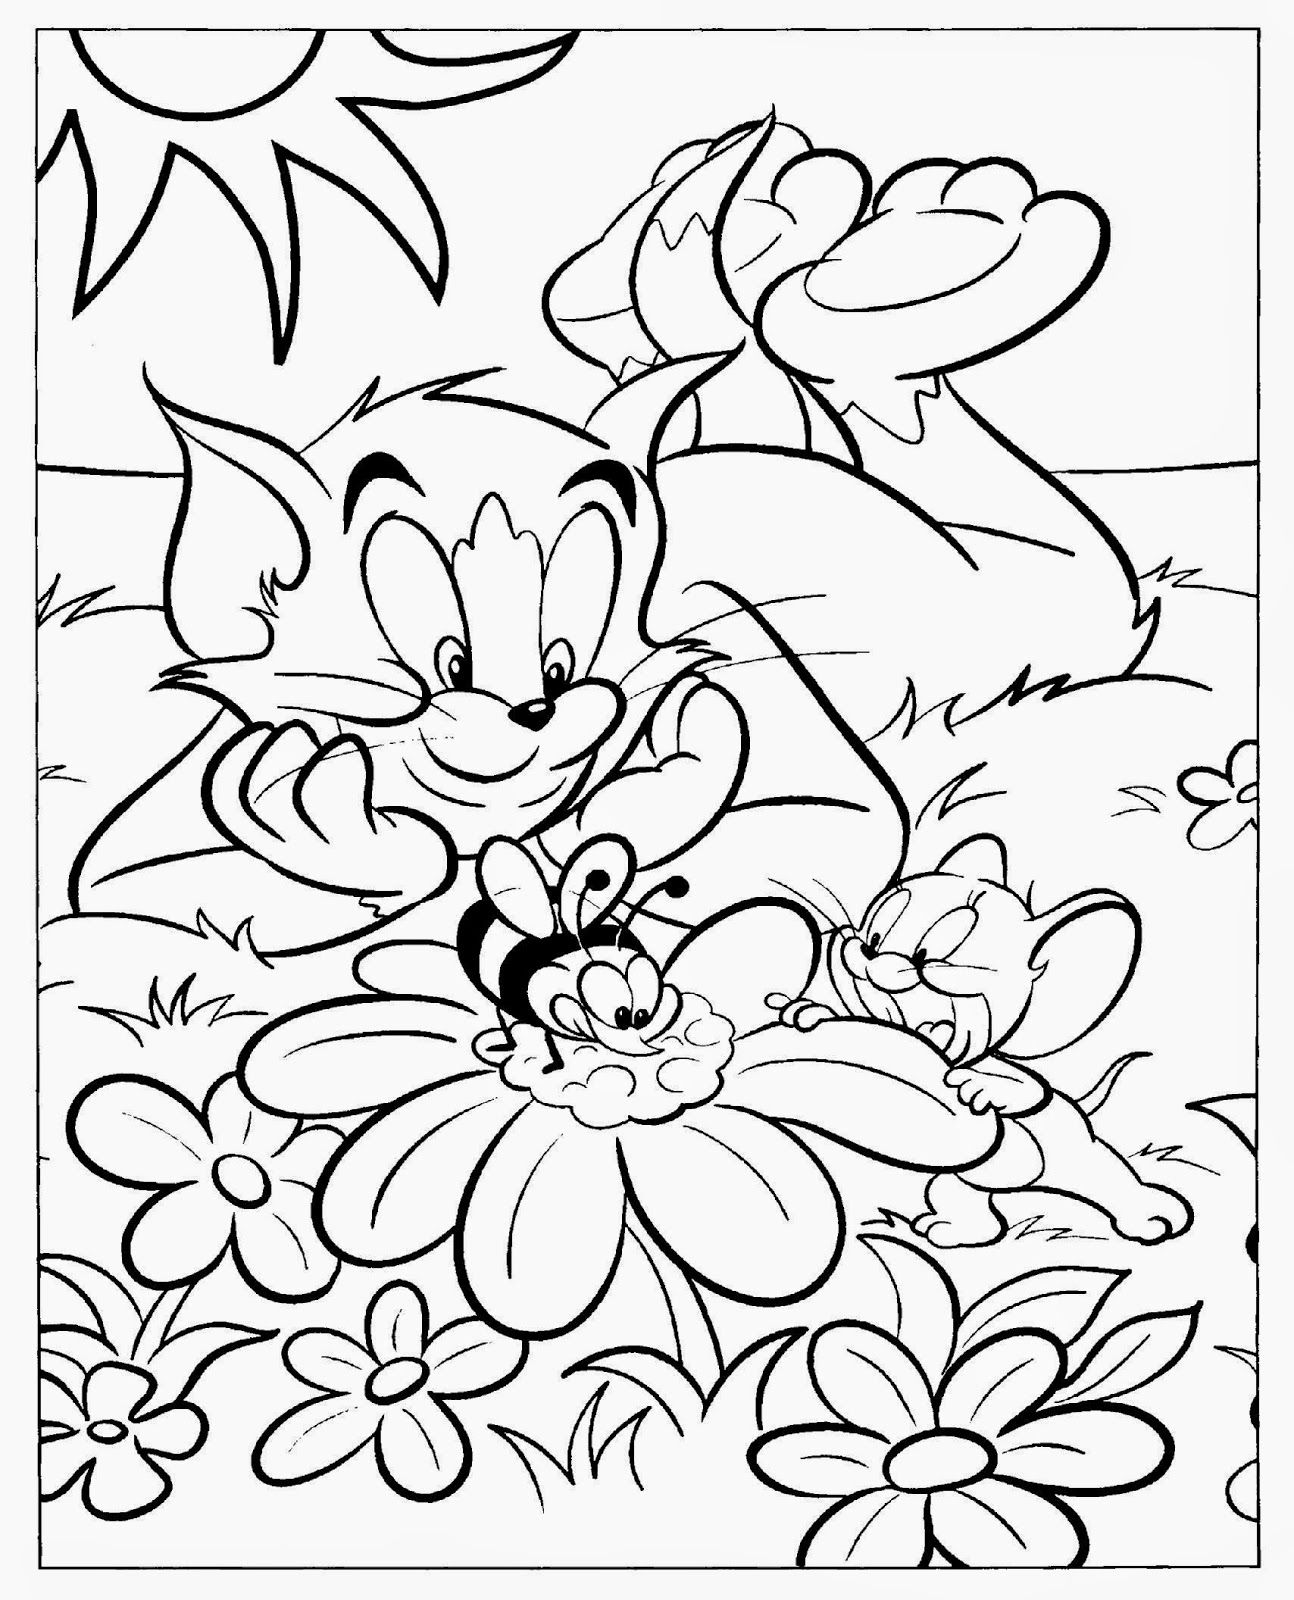 Coloring Pages Cartoon Network - Coloring Home